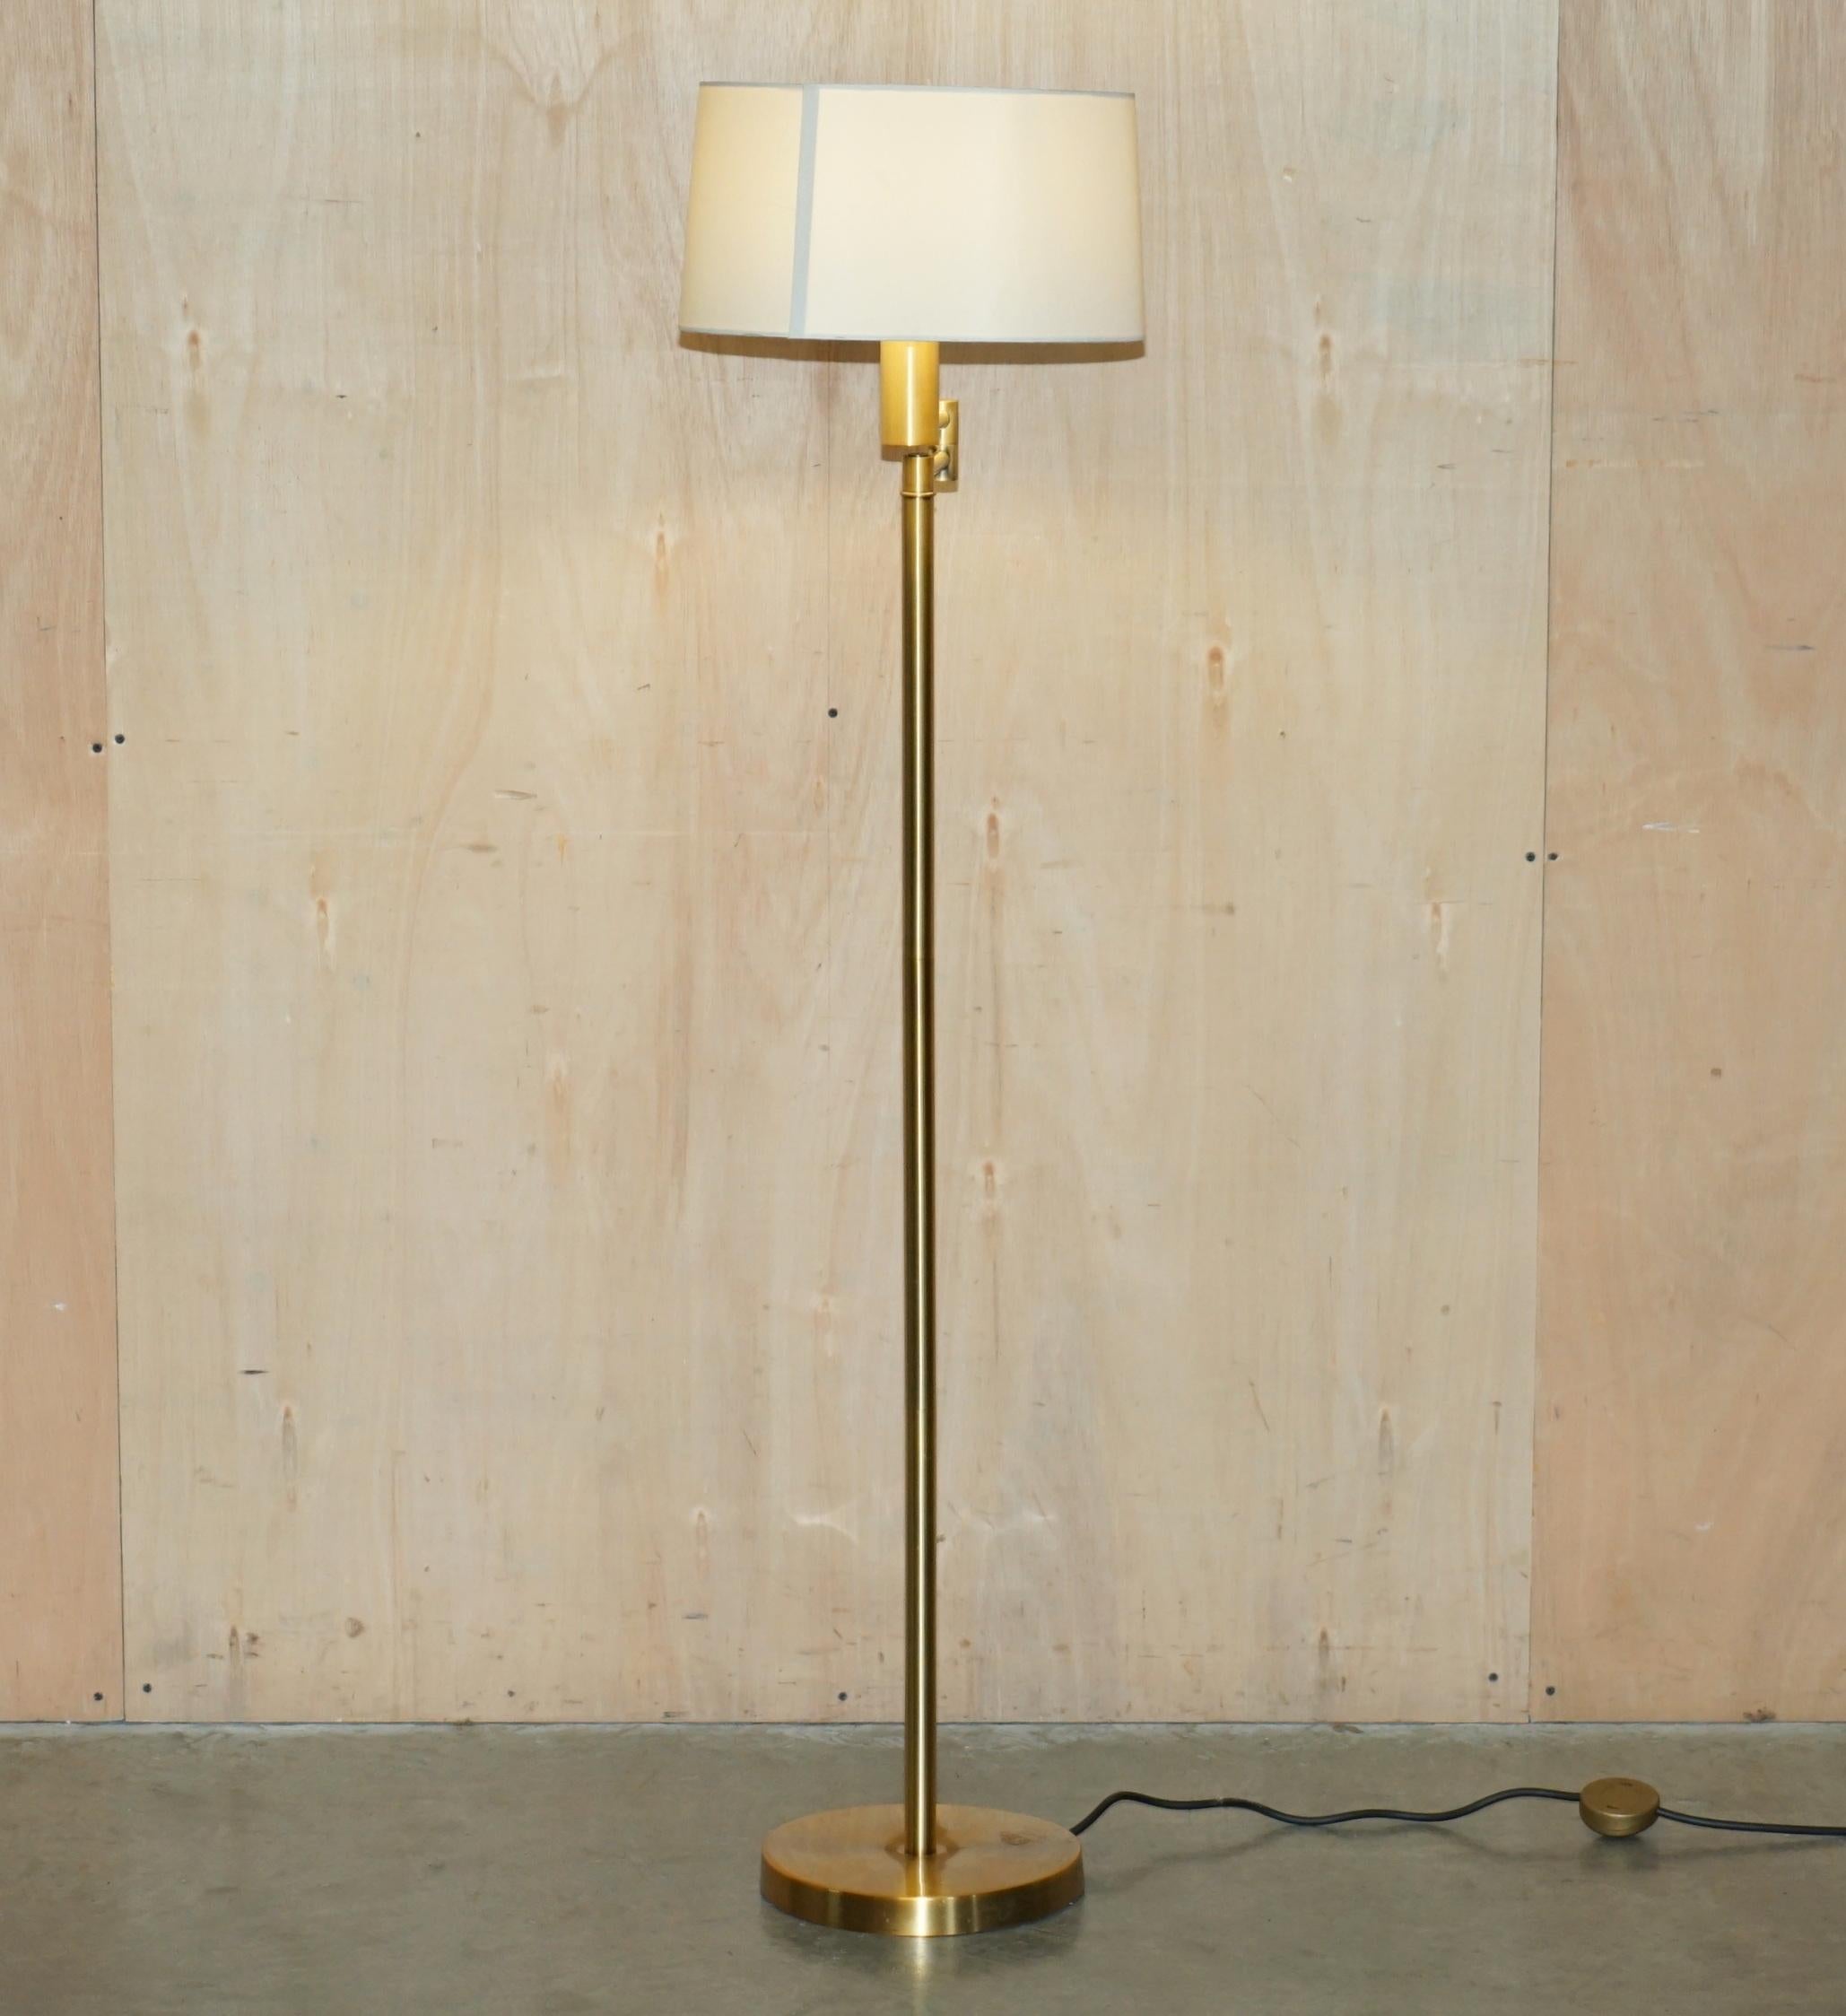 We are delighted to offer for sale this lovely Vintage brass affect Ralph Lauren Articulated Floor Standing lamp 

A very good looking well made and decorative floor lamp, the top arm is articulated so you can change the position